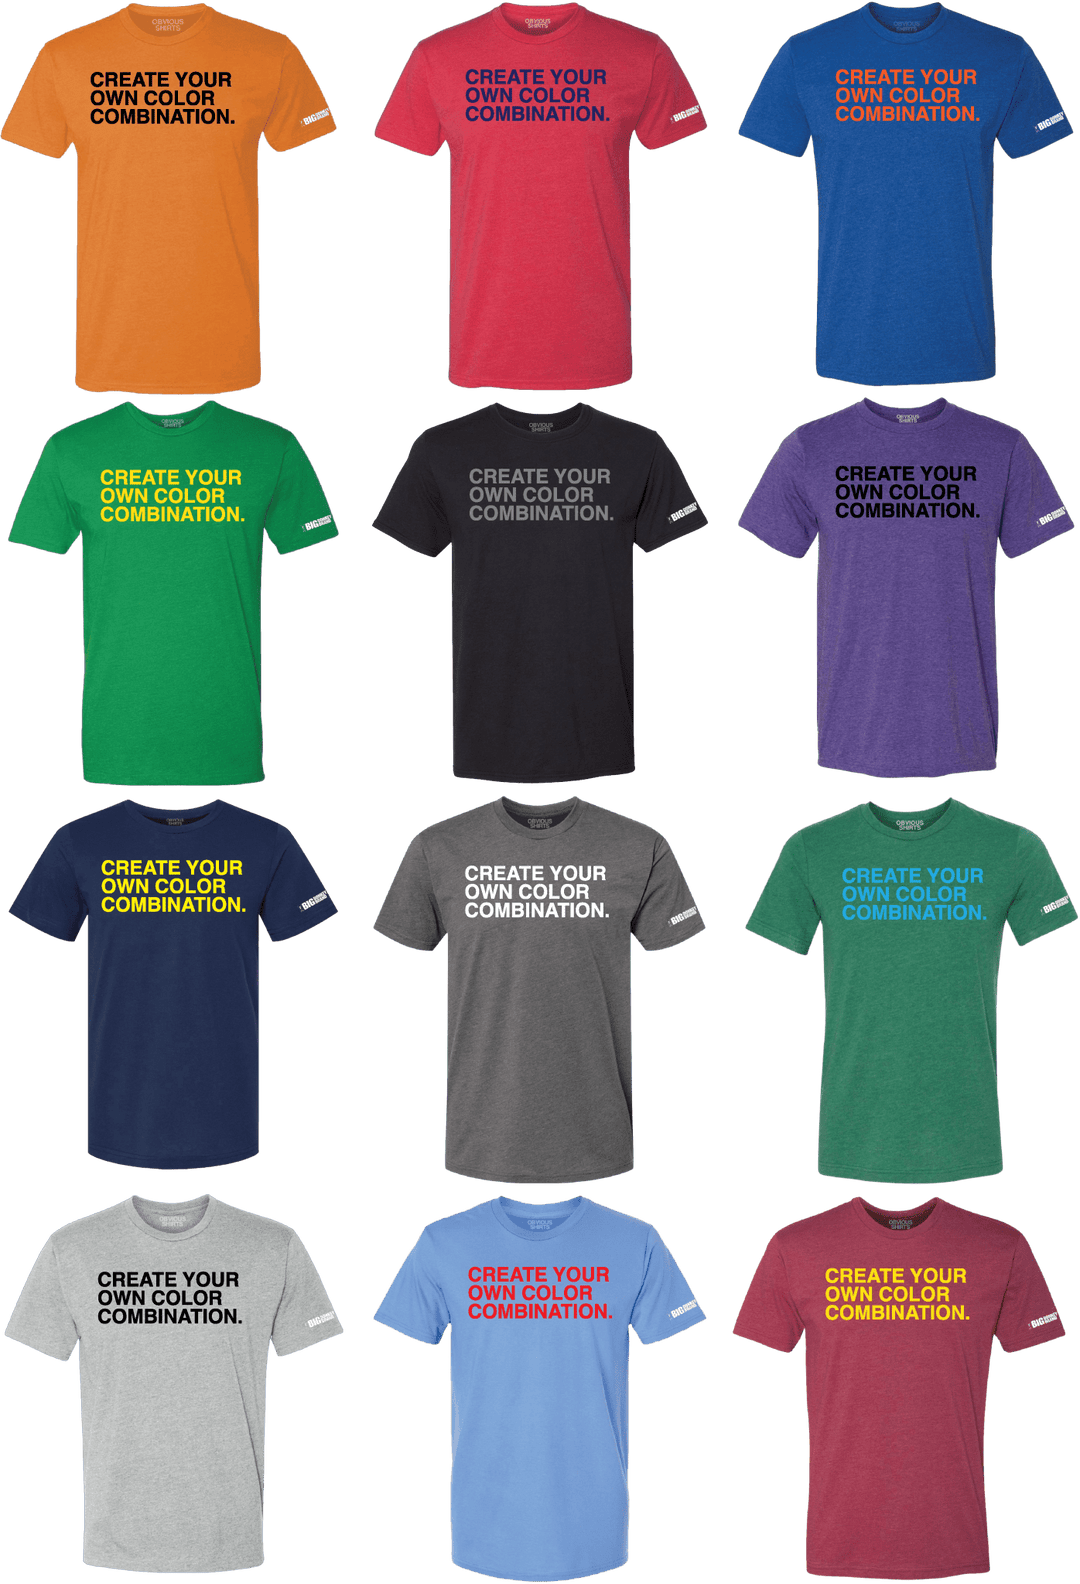 CONDITIONING SUCKS. (CUSTOMIZE) - OBVIOUS SHIRTS